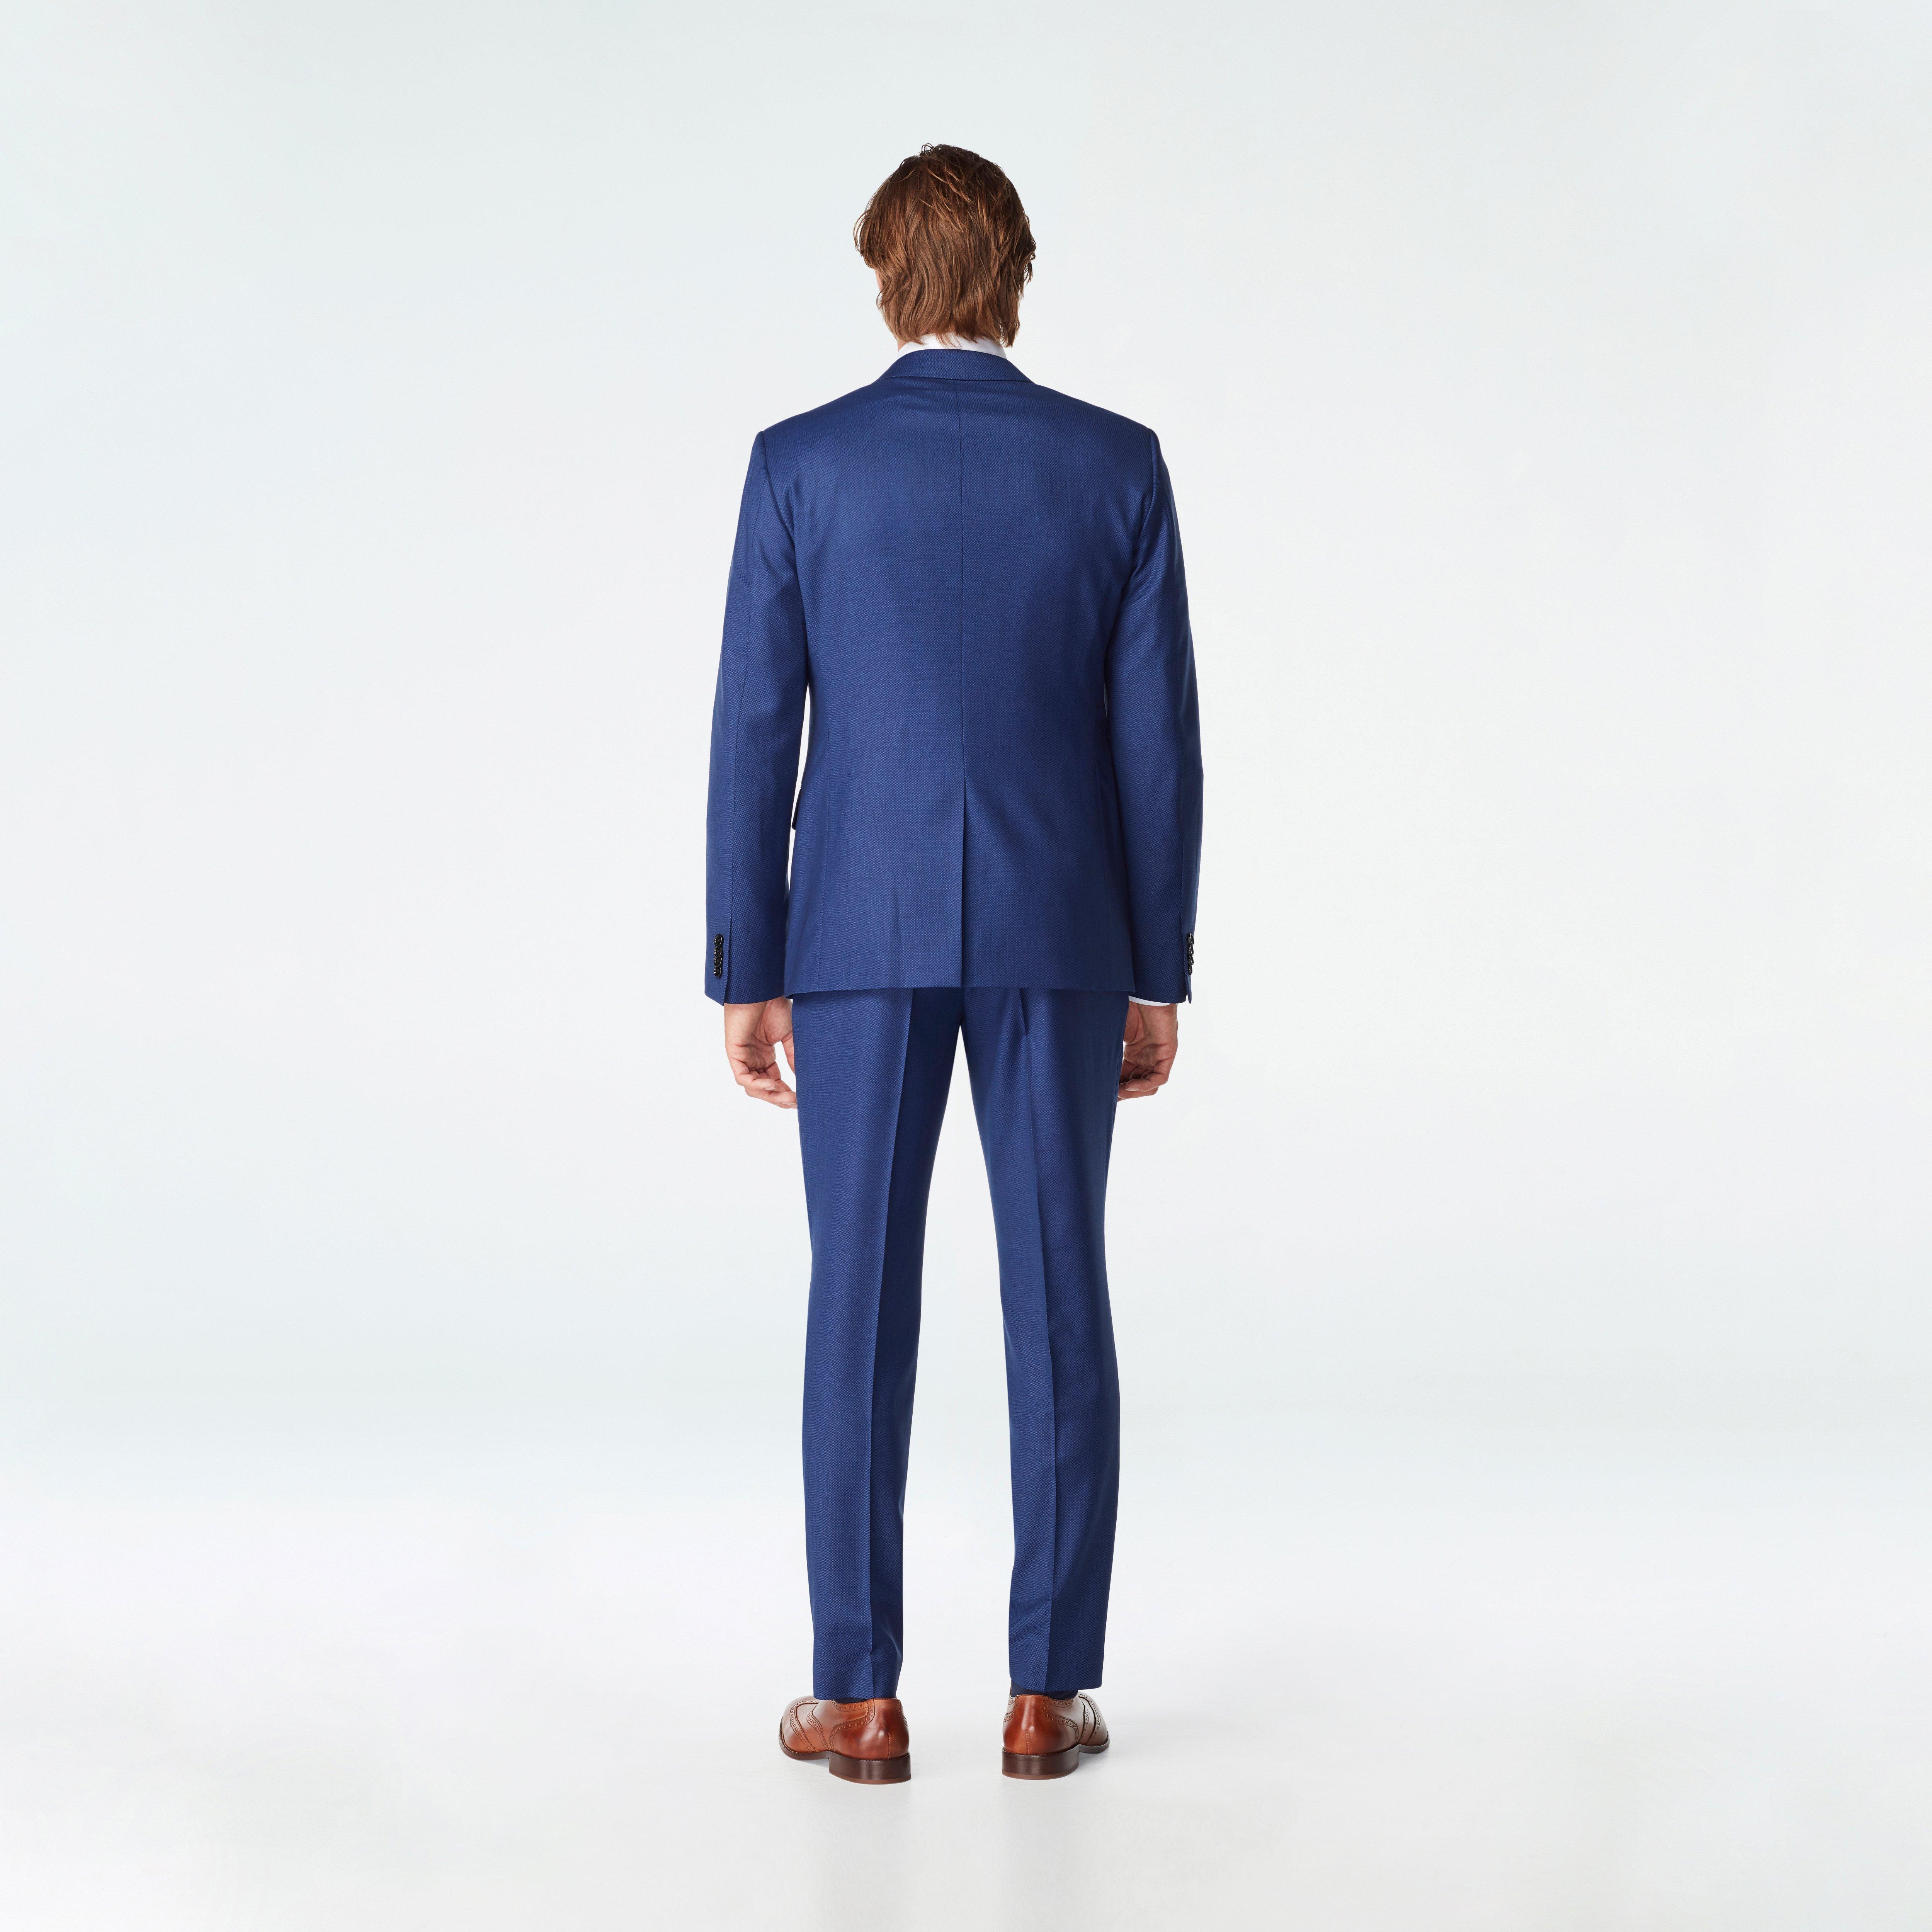 Custom Suits Made For You - Highbridge Nailhead Blue Suit | INDOCHINO